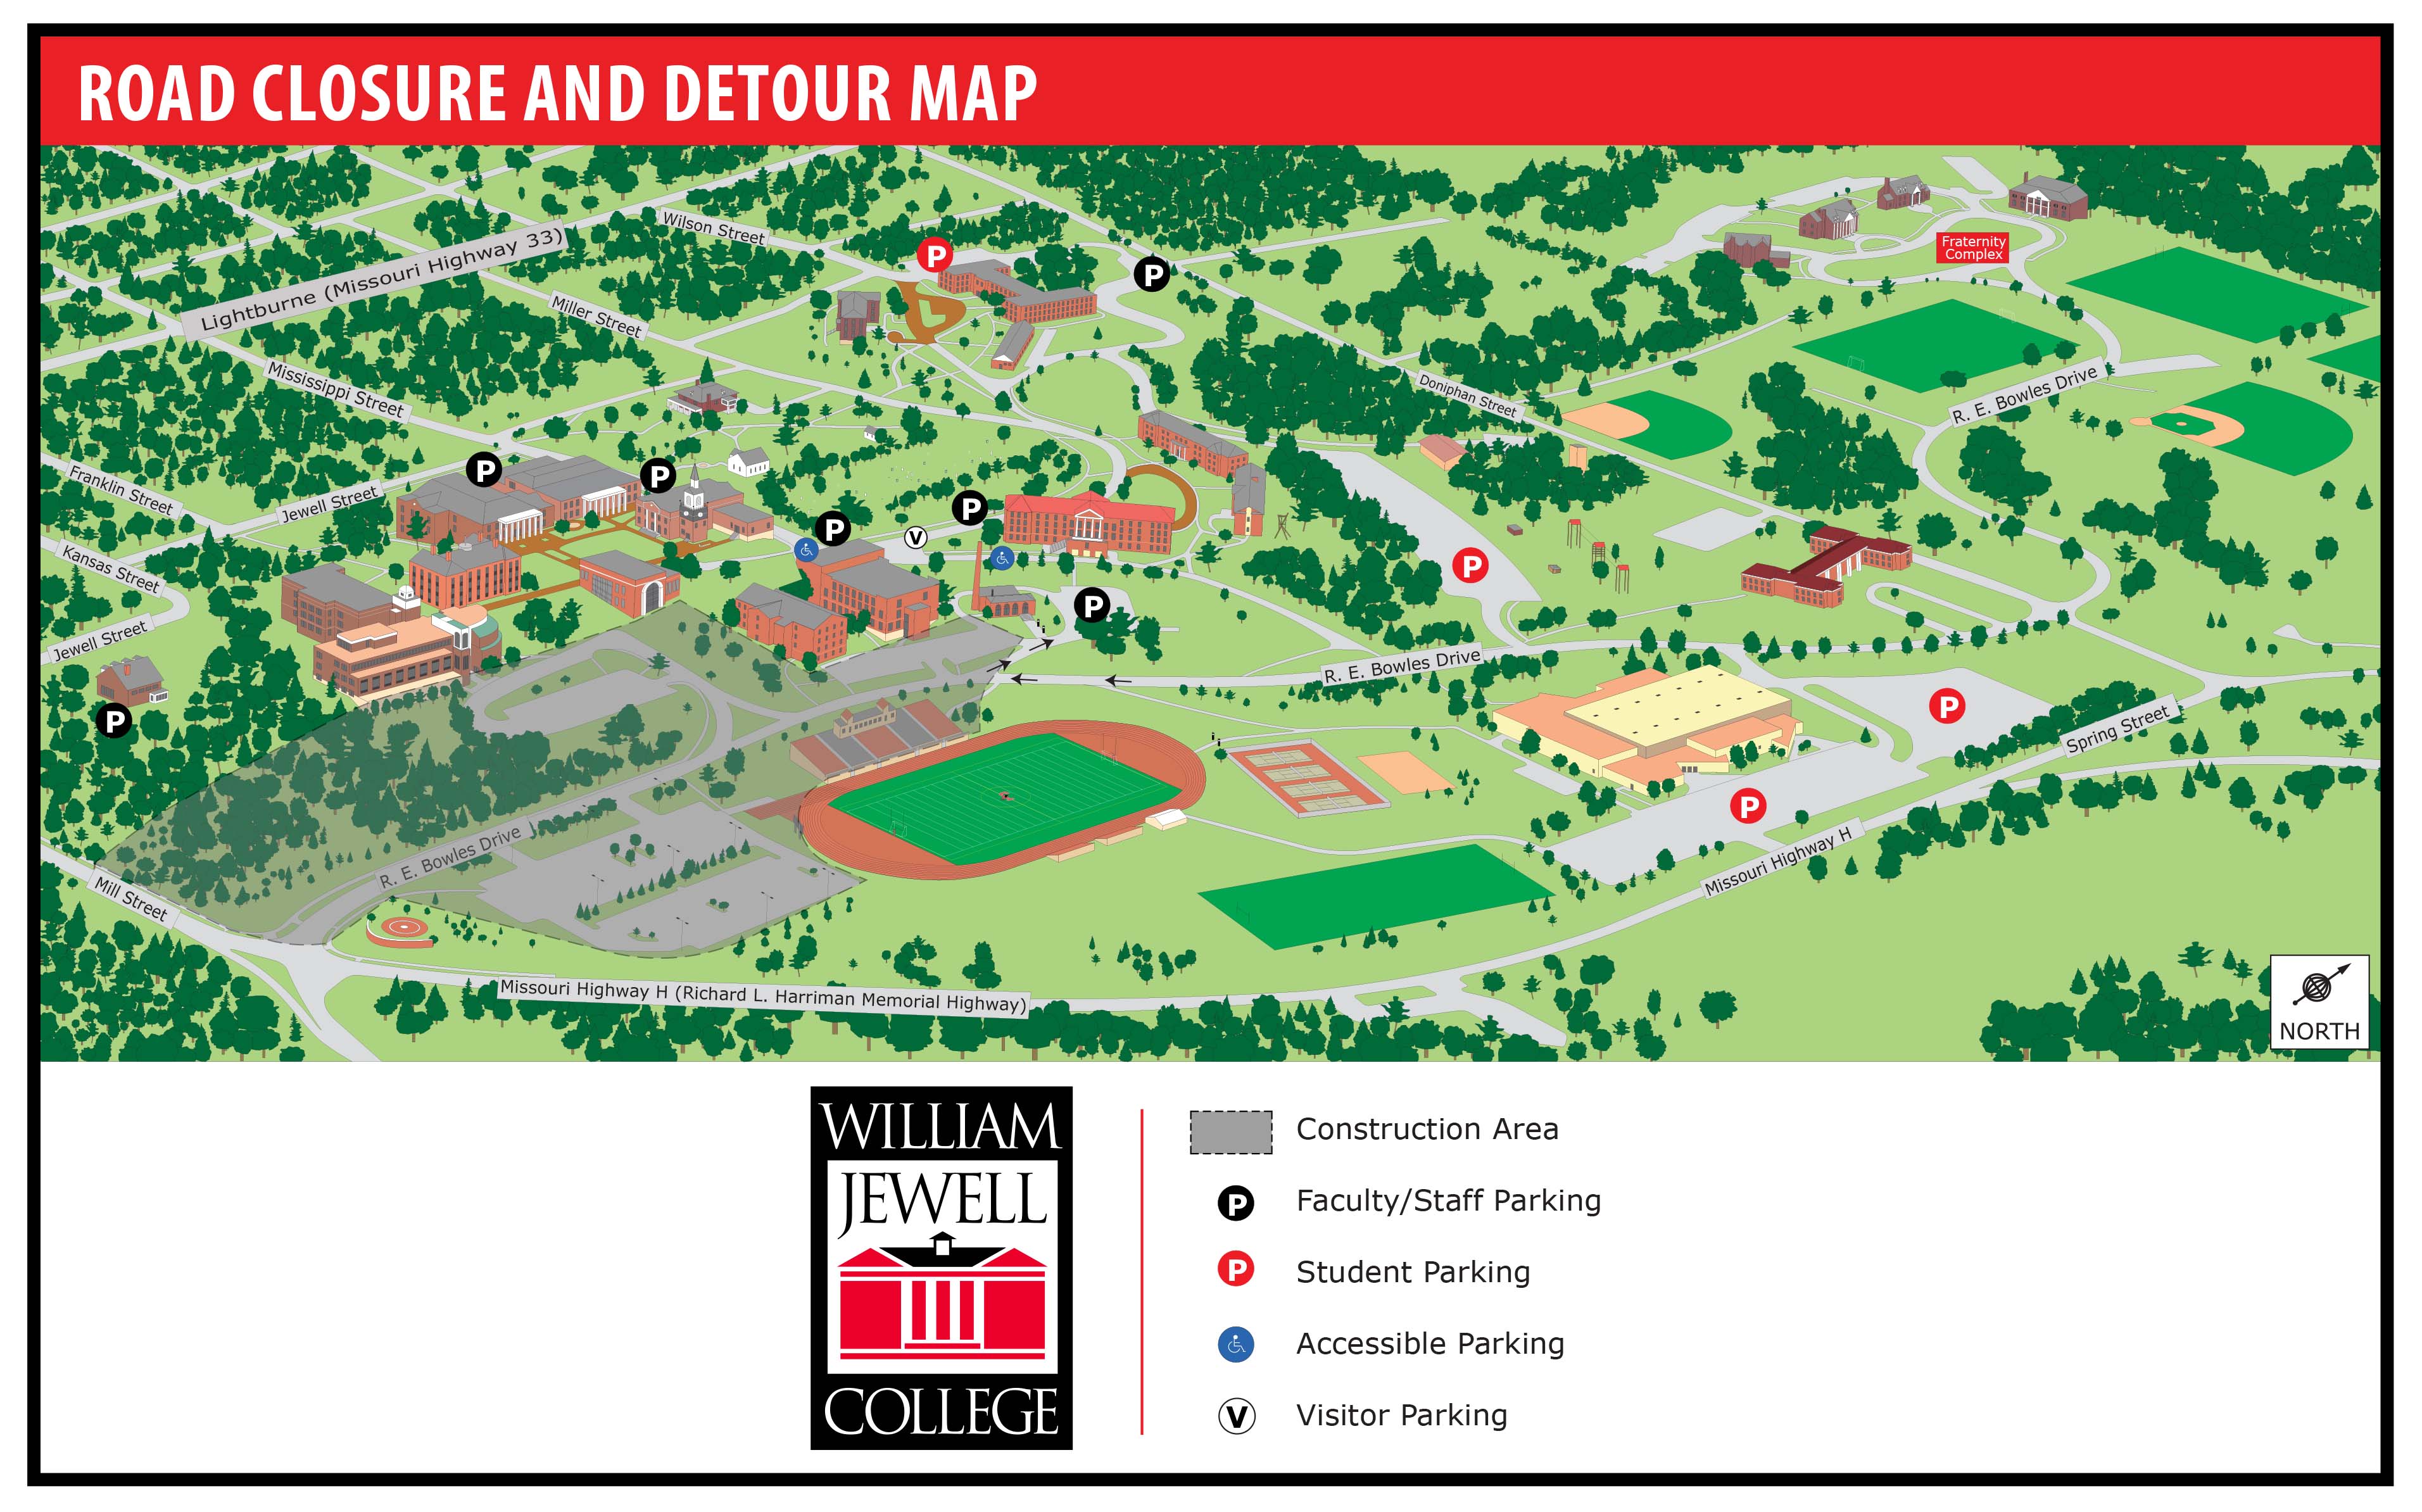 Construction map of William Jewell College